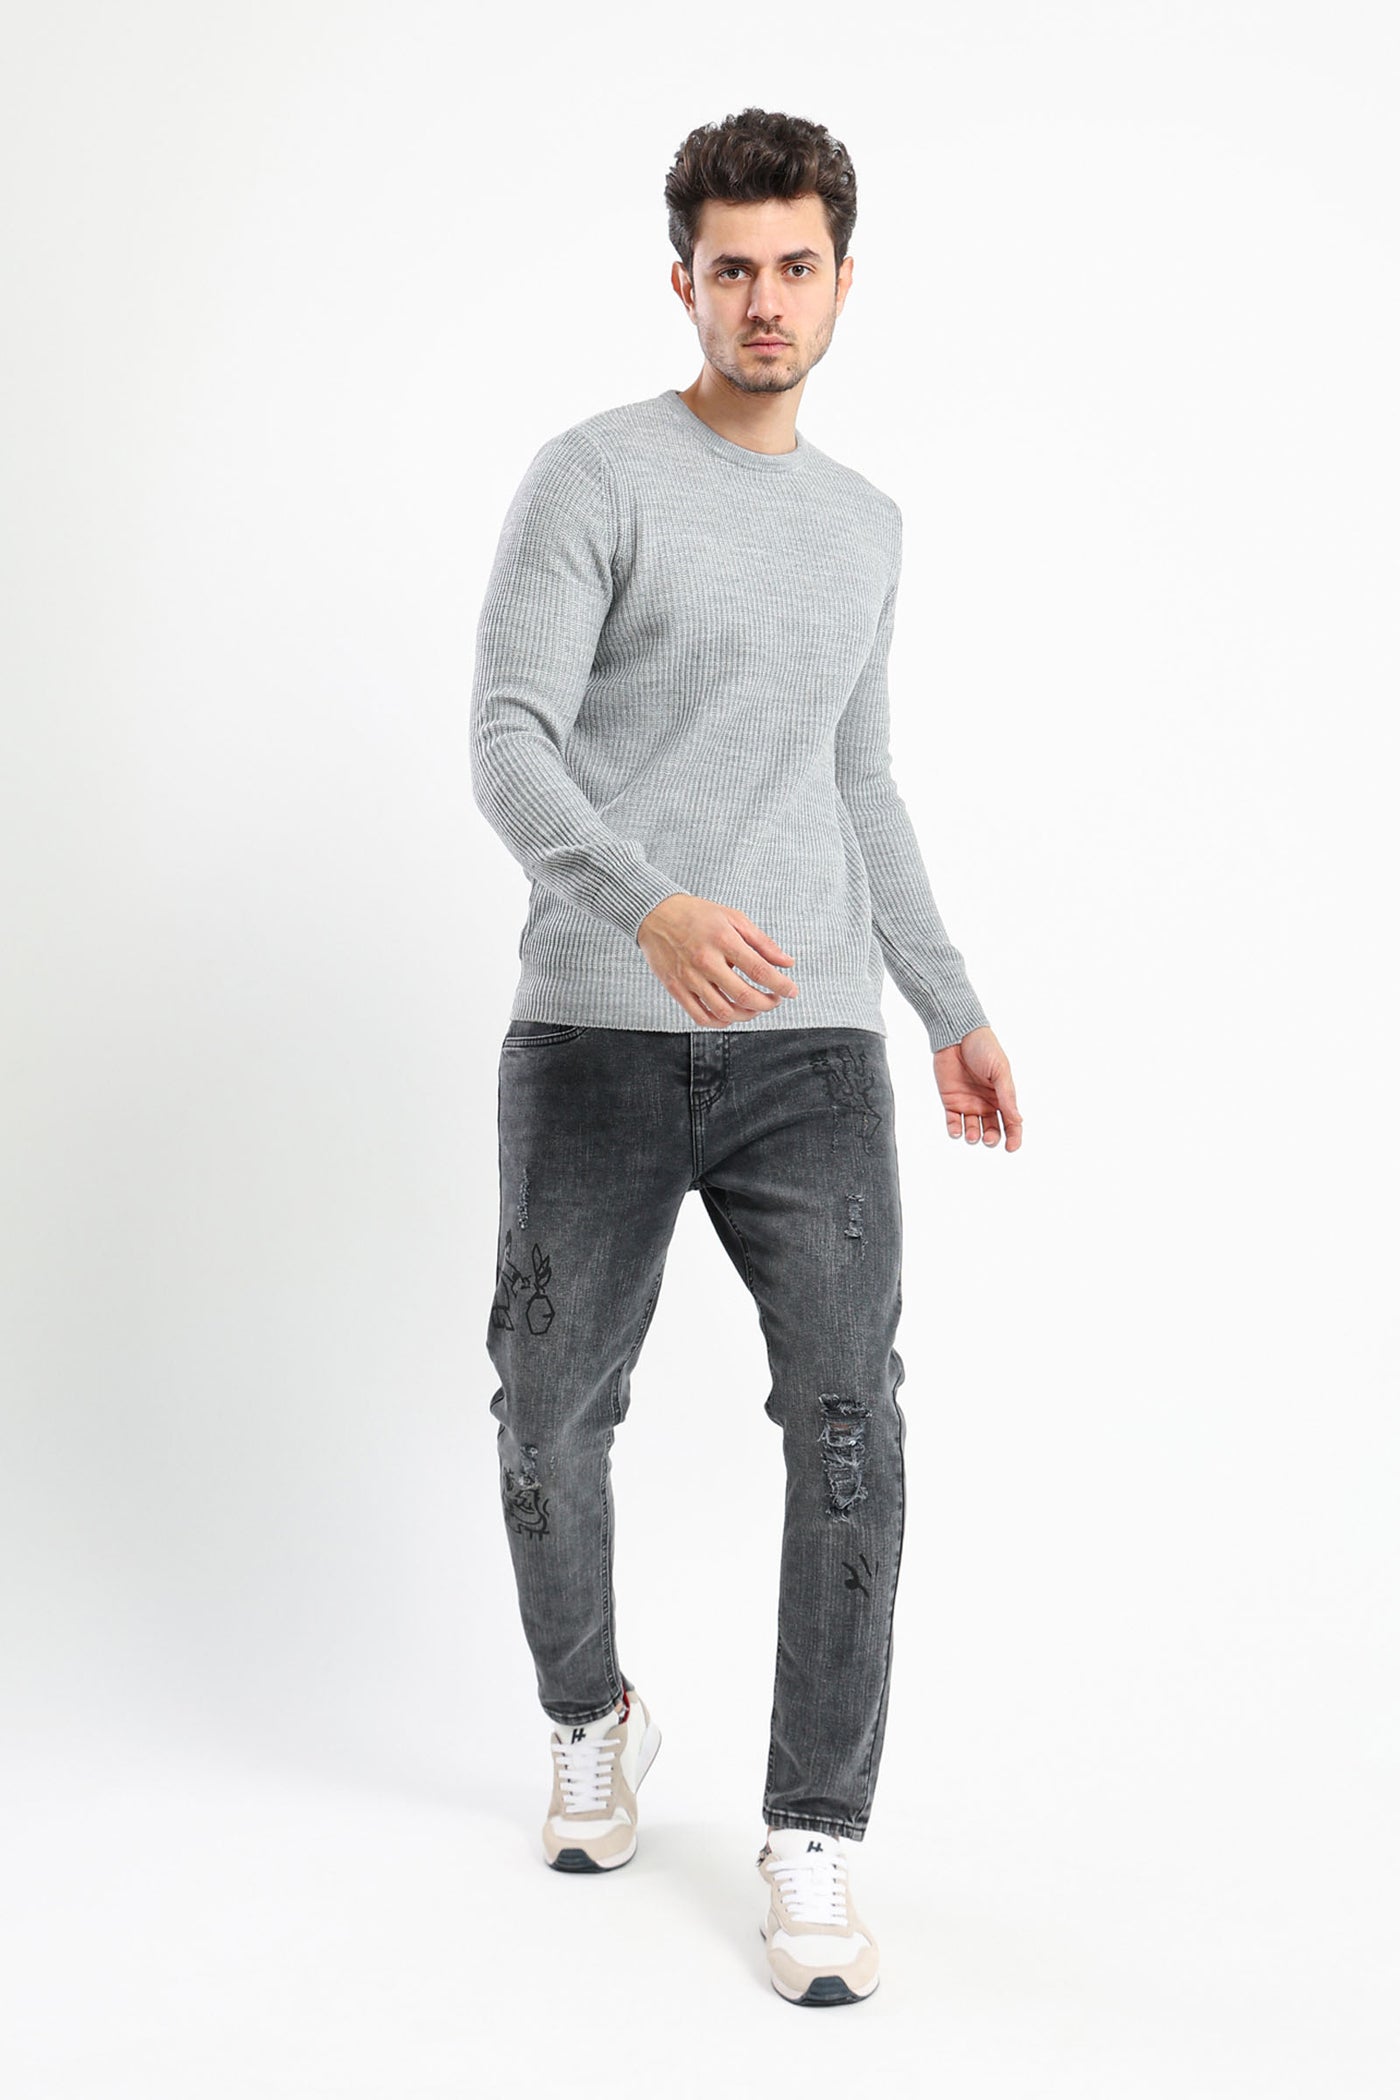 Jeans - Ripped Design - Washed Effect